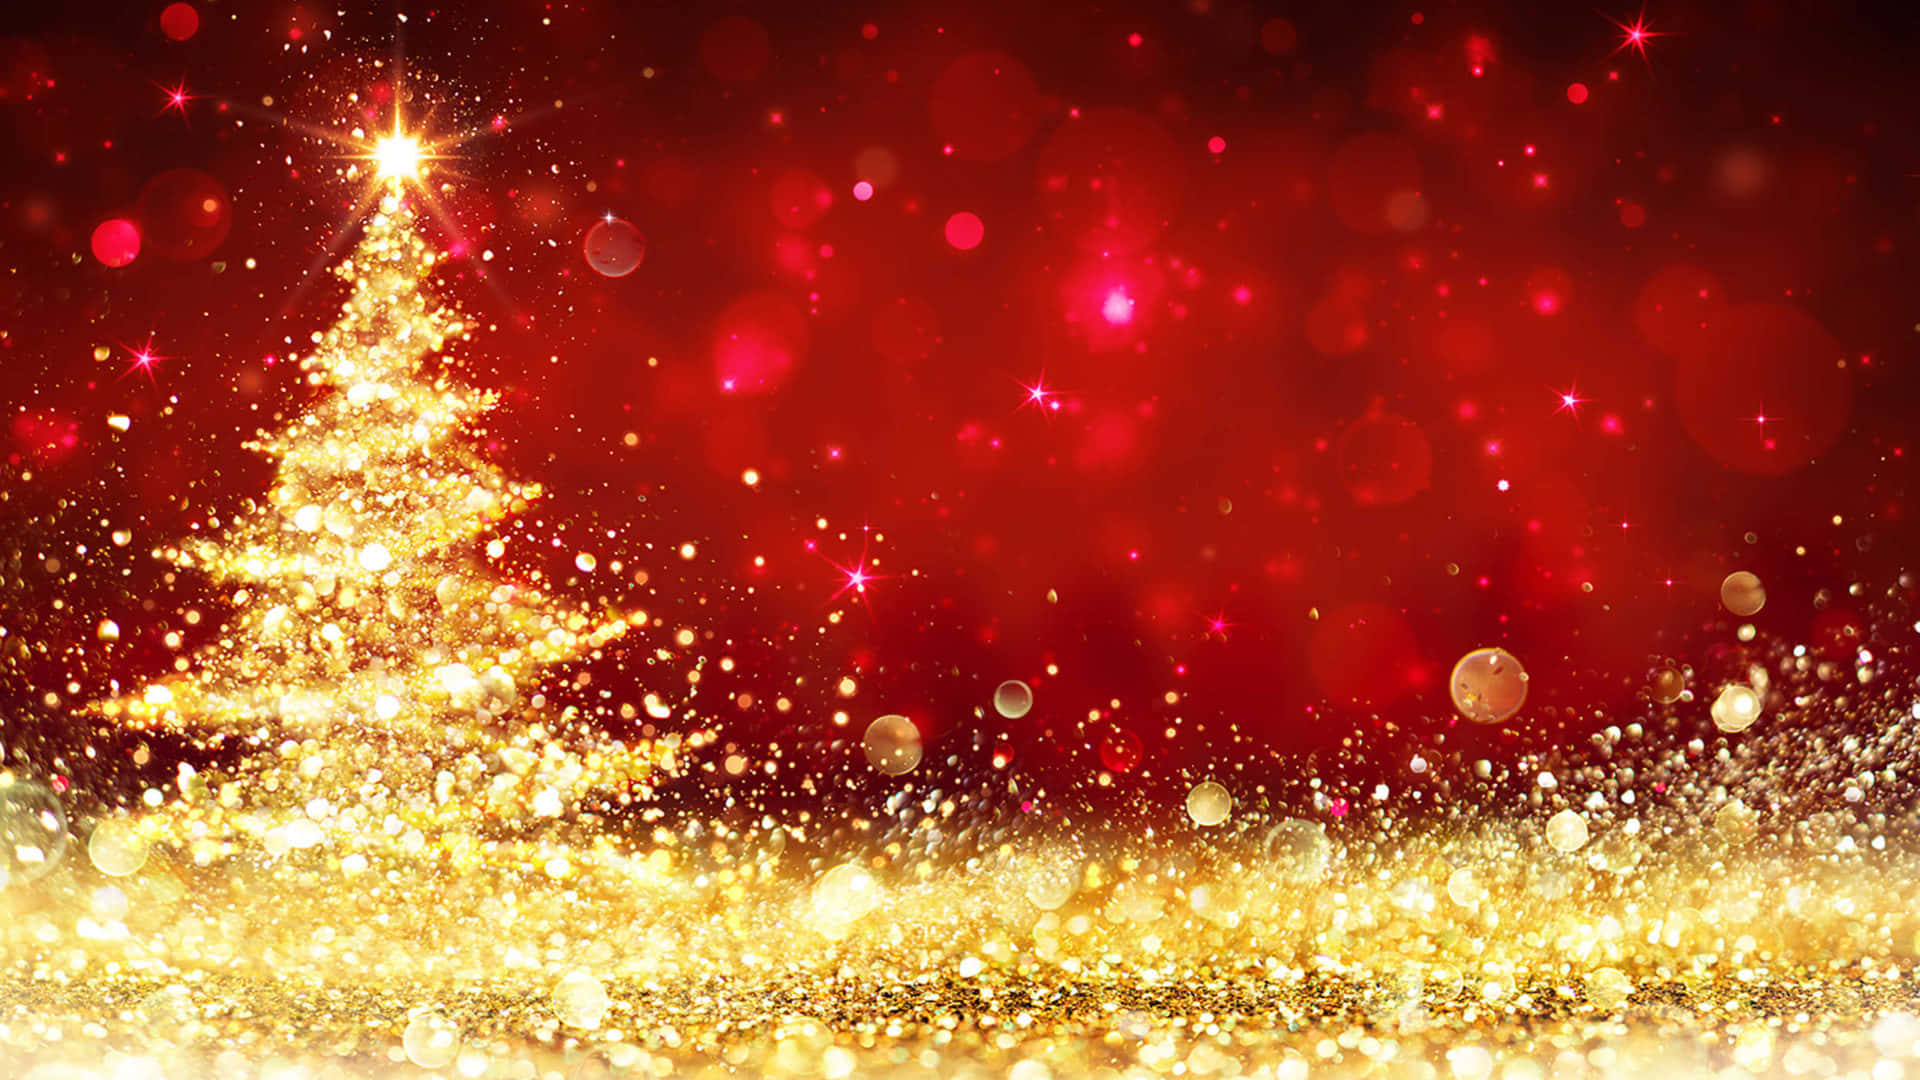 Get ready for Christmas with a festive red background